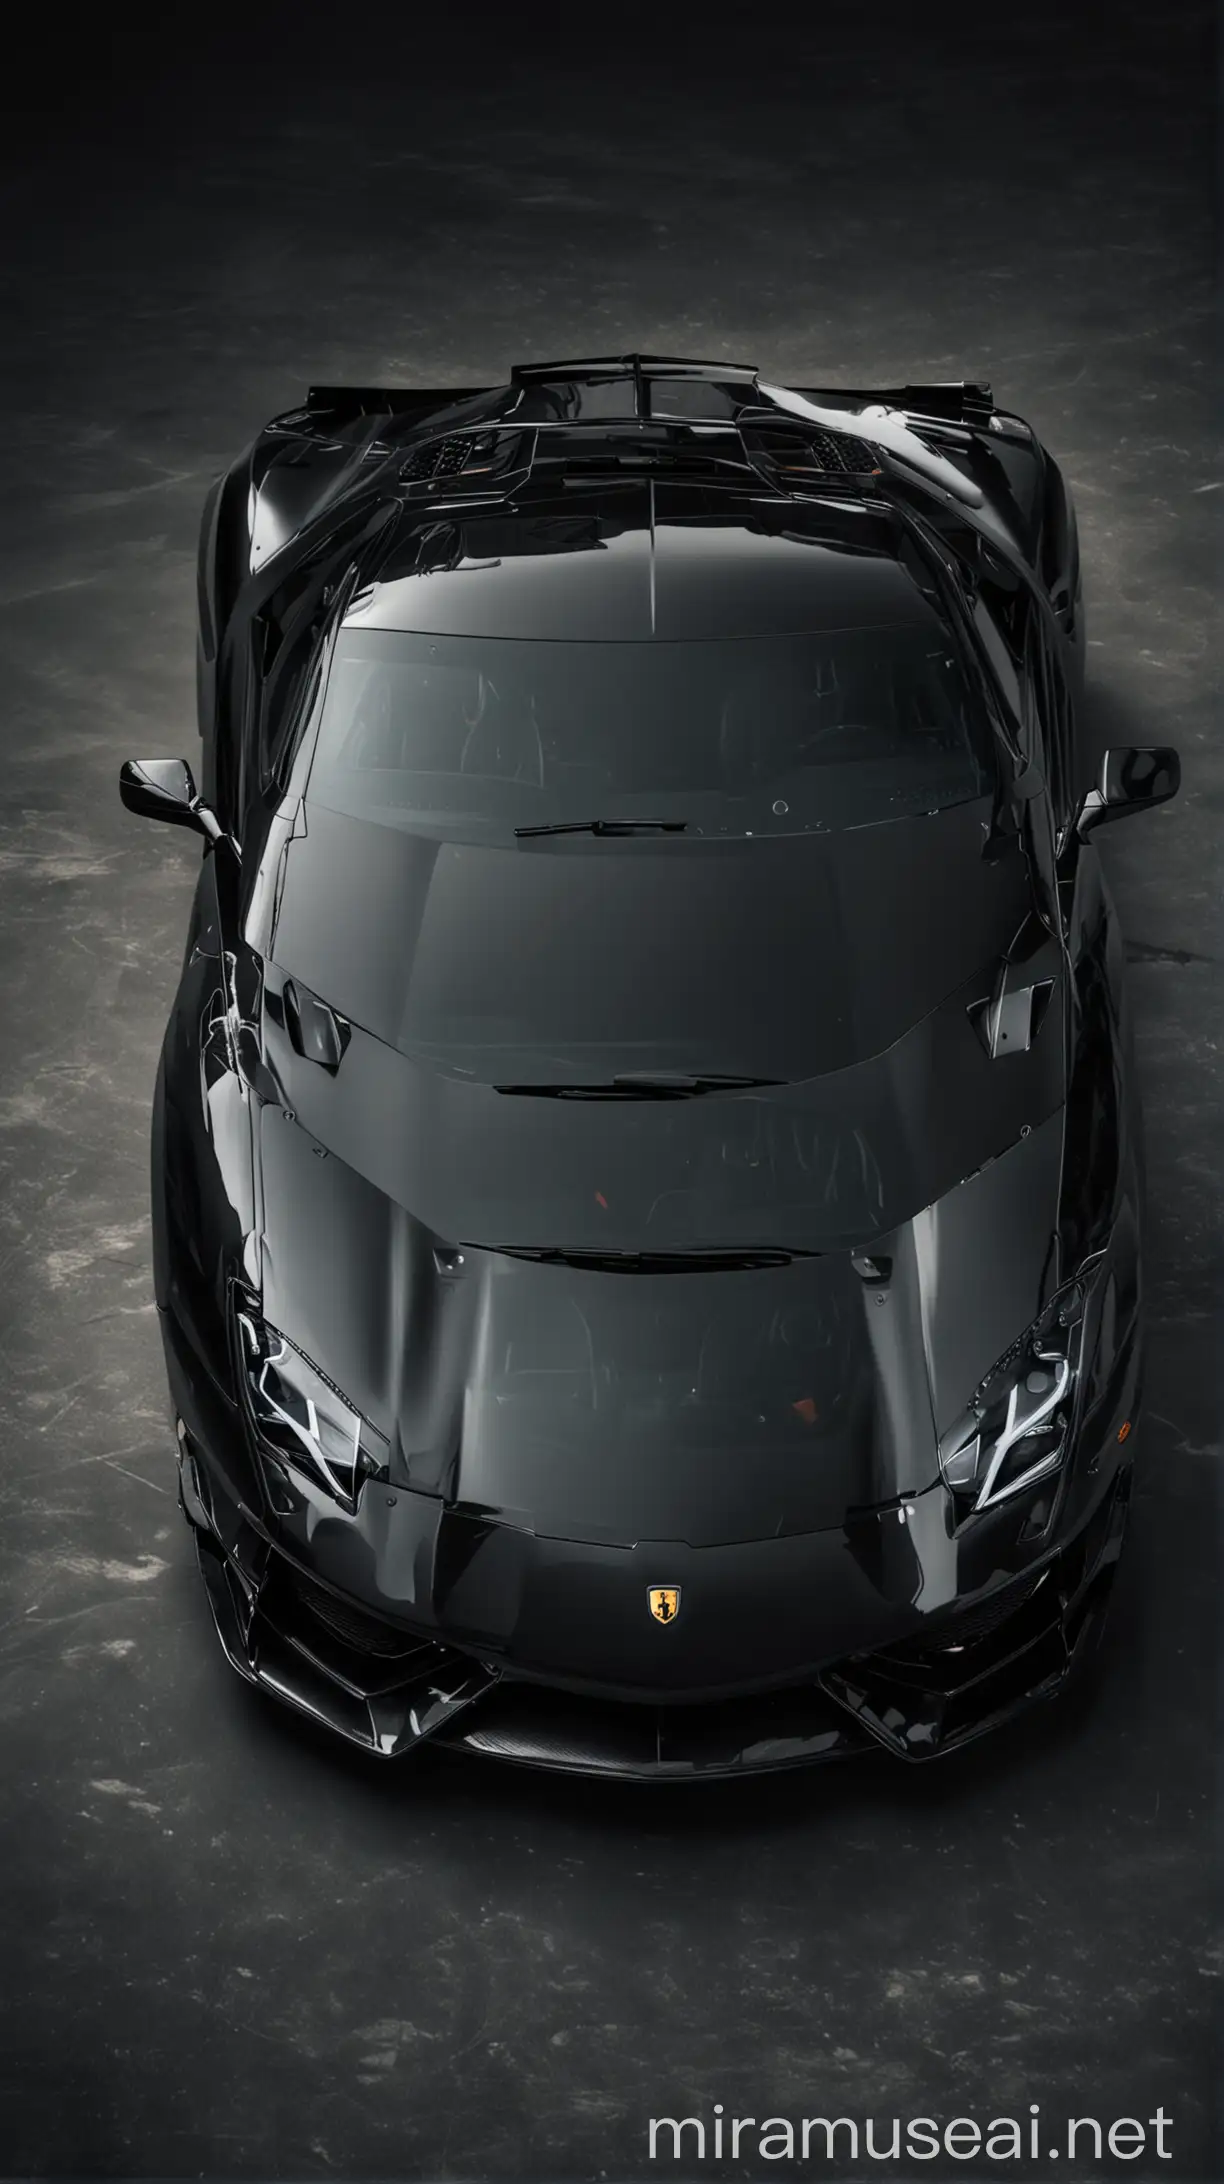 Black Lamborghini Super Sports Car with Headlights On Front View